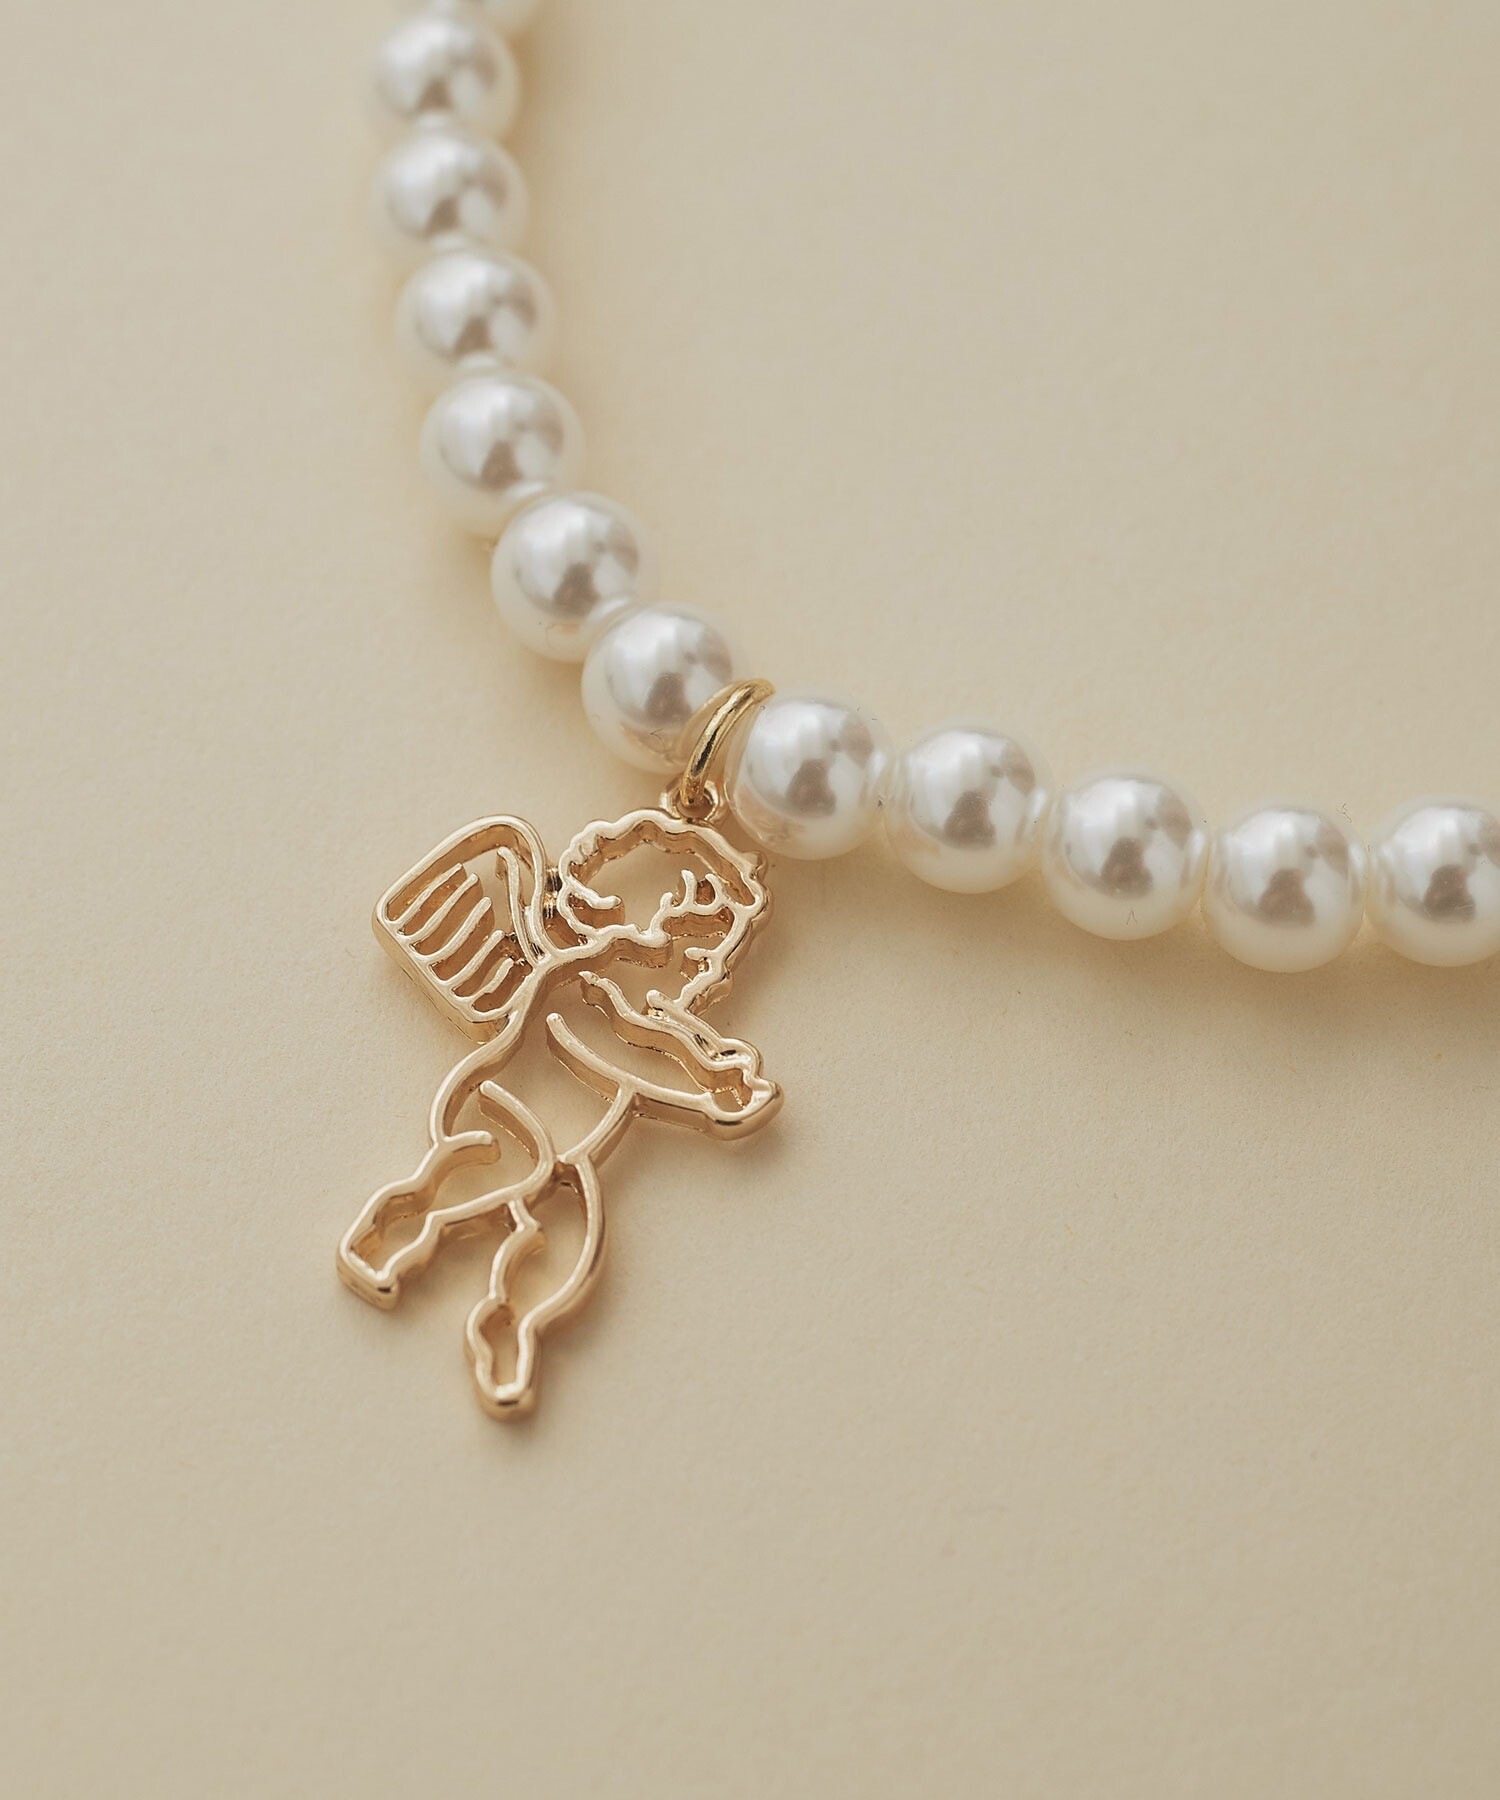 AMBIDEX Store 〇ANGEL CHARM pearl necklace(F ゴールド): l'atelier 